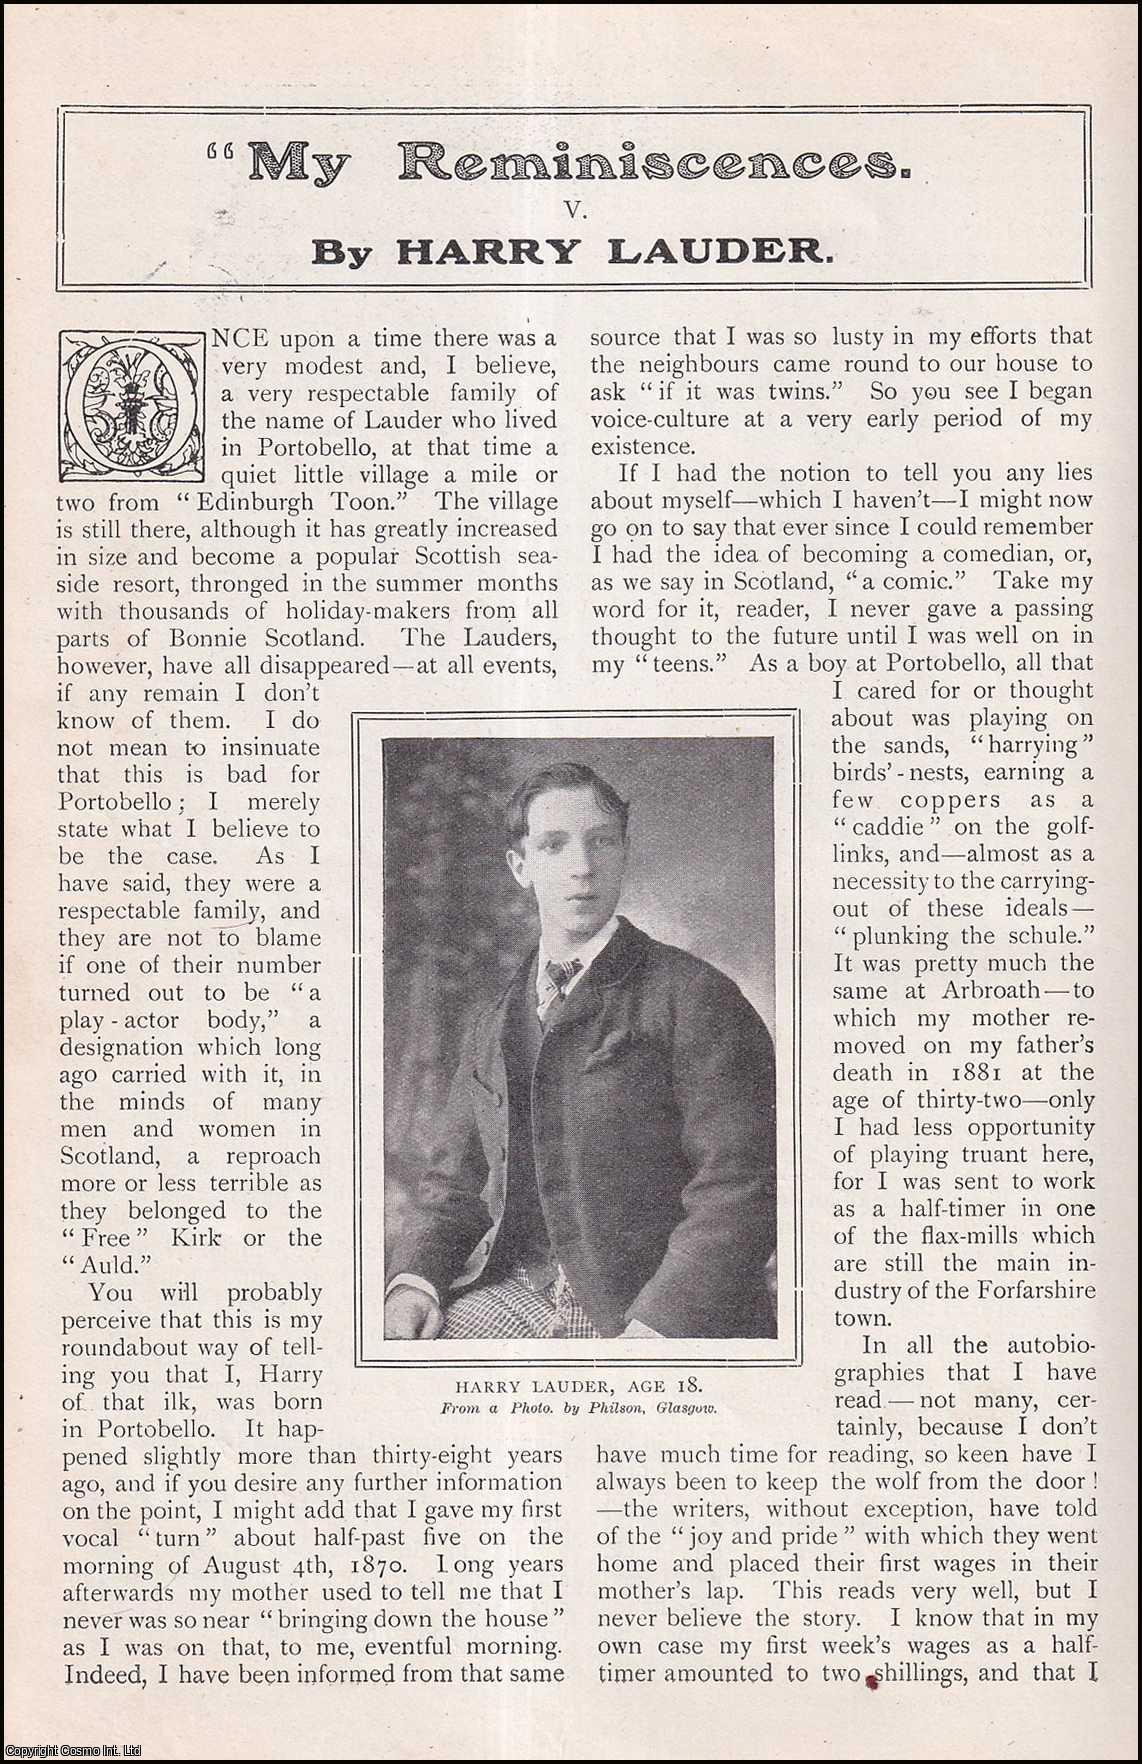 No Author Stated - Harry Lauder : Scottish Singer. My Reminiscences. Illustrated by Max Cowper & W. R. S. Stott. An uncommon original article from The Strand Magazine, 1909.